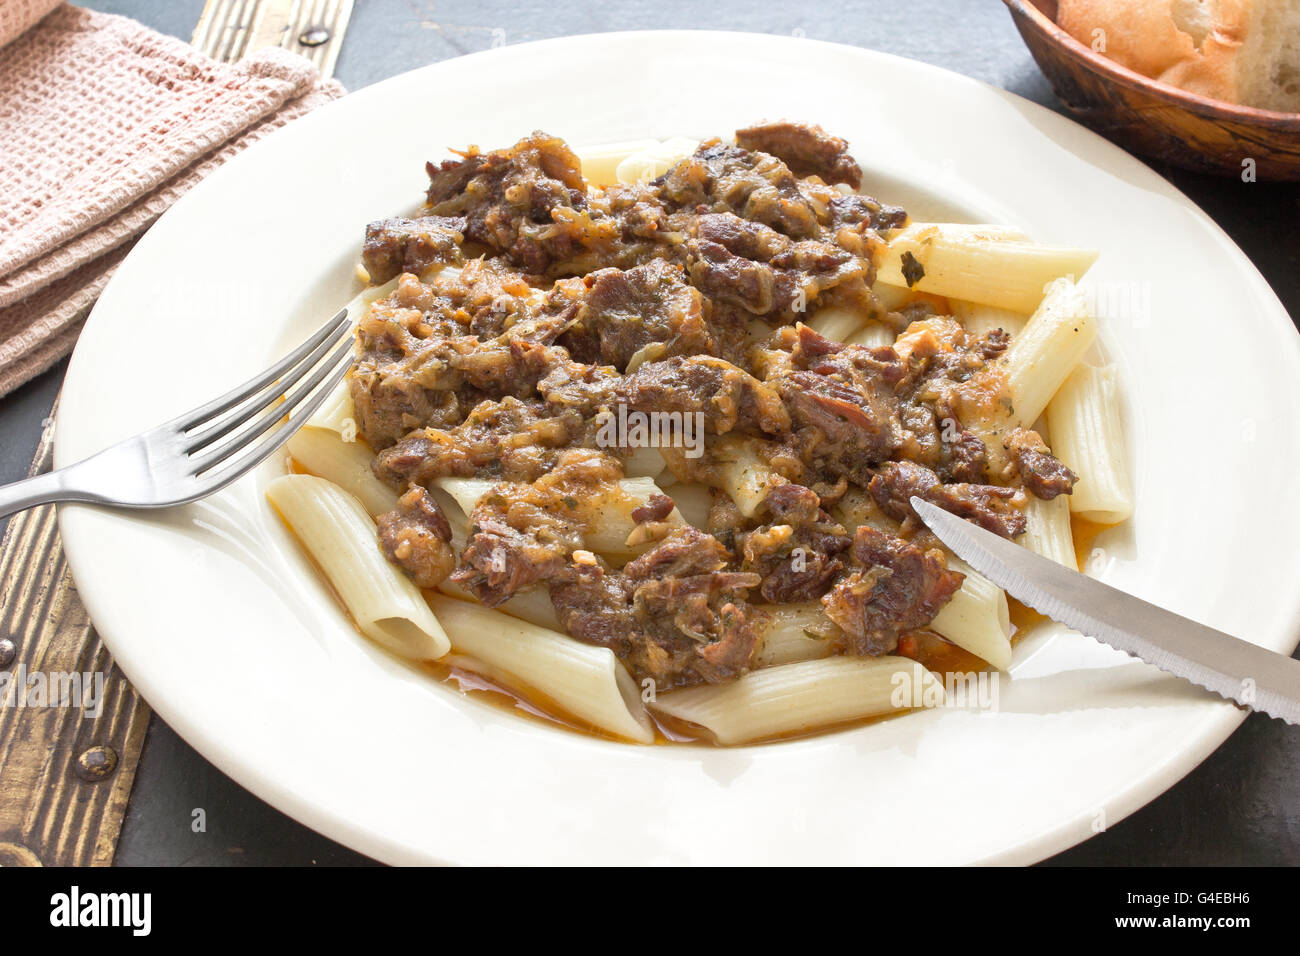 Beef goulash with macaroni in plate Stock Photo